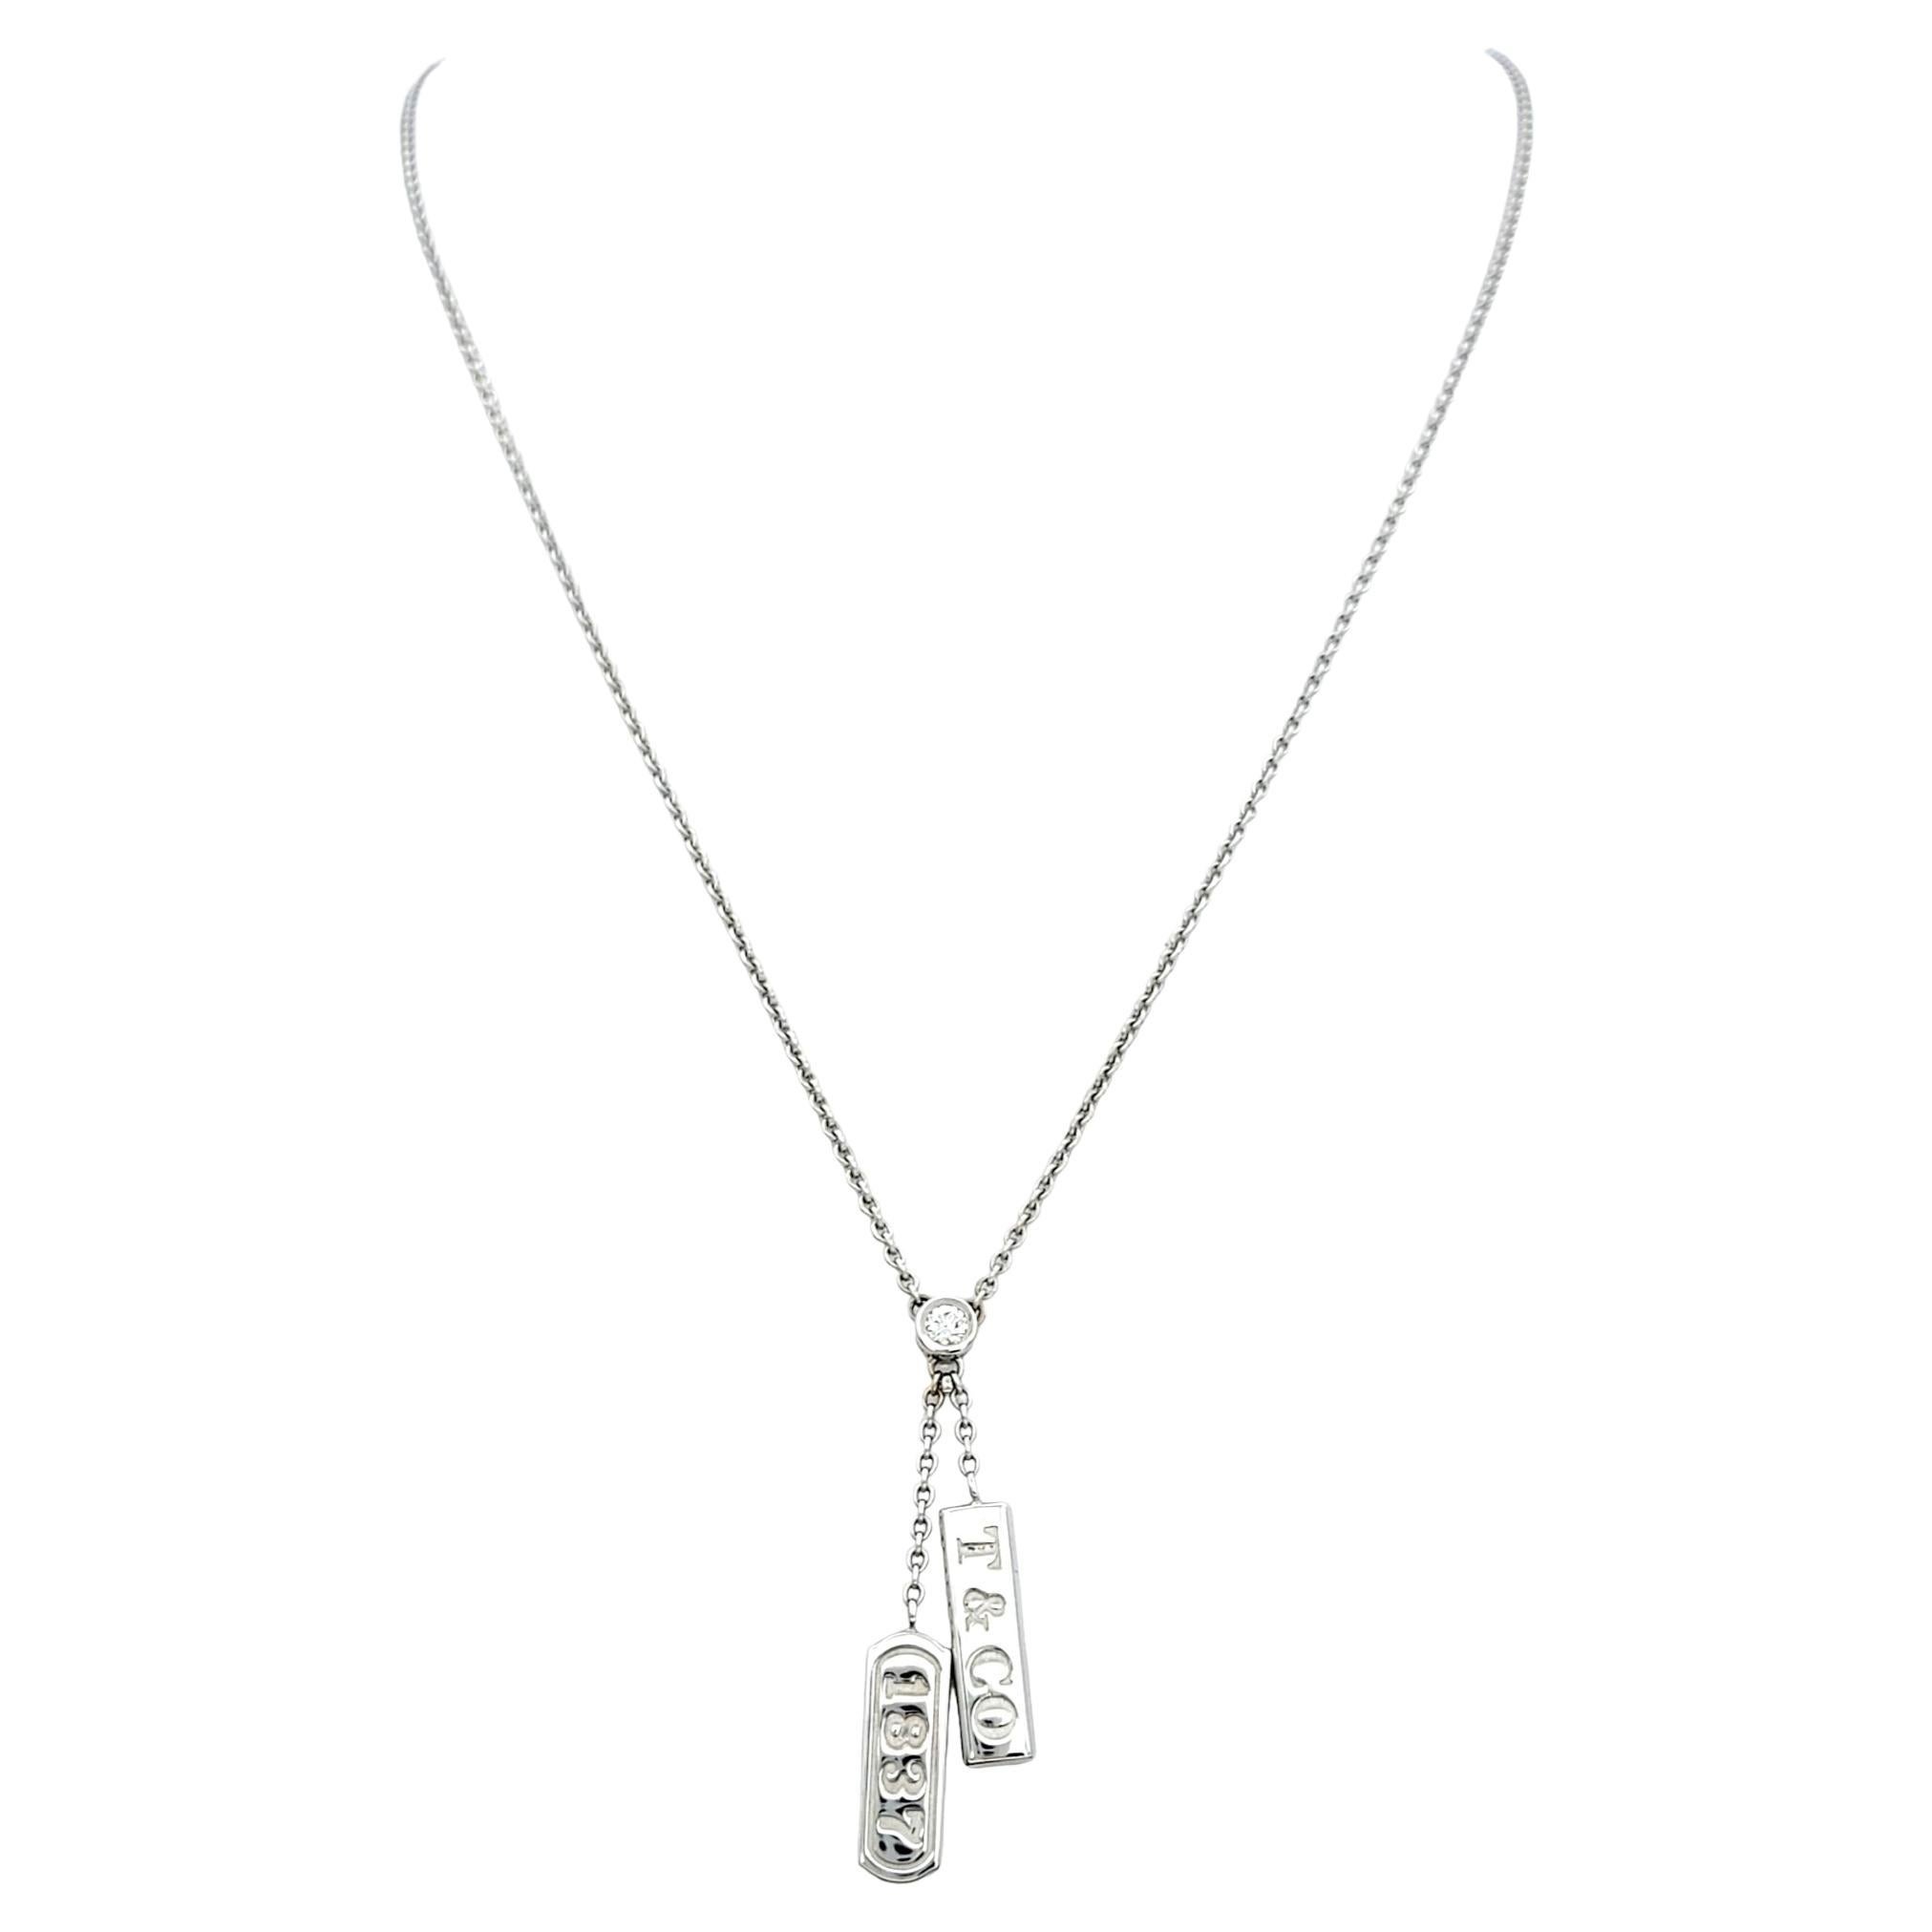 This classic Tiffany & Co. pendant necklace is simple yet elegant. The 18 karat white gold chain is both delicate and durable, making it perfect for everyday wear or special occasions.

The stationary pendant, featuring two slender bars engraved